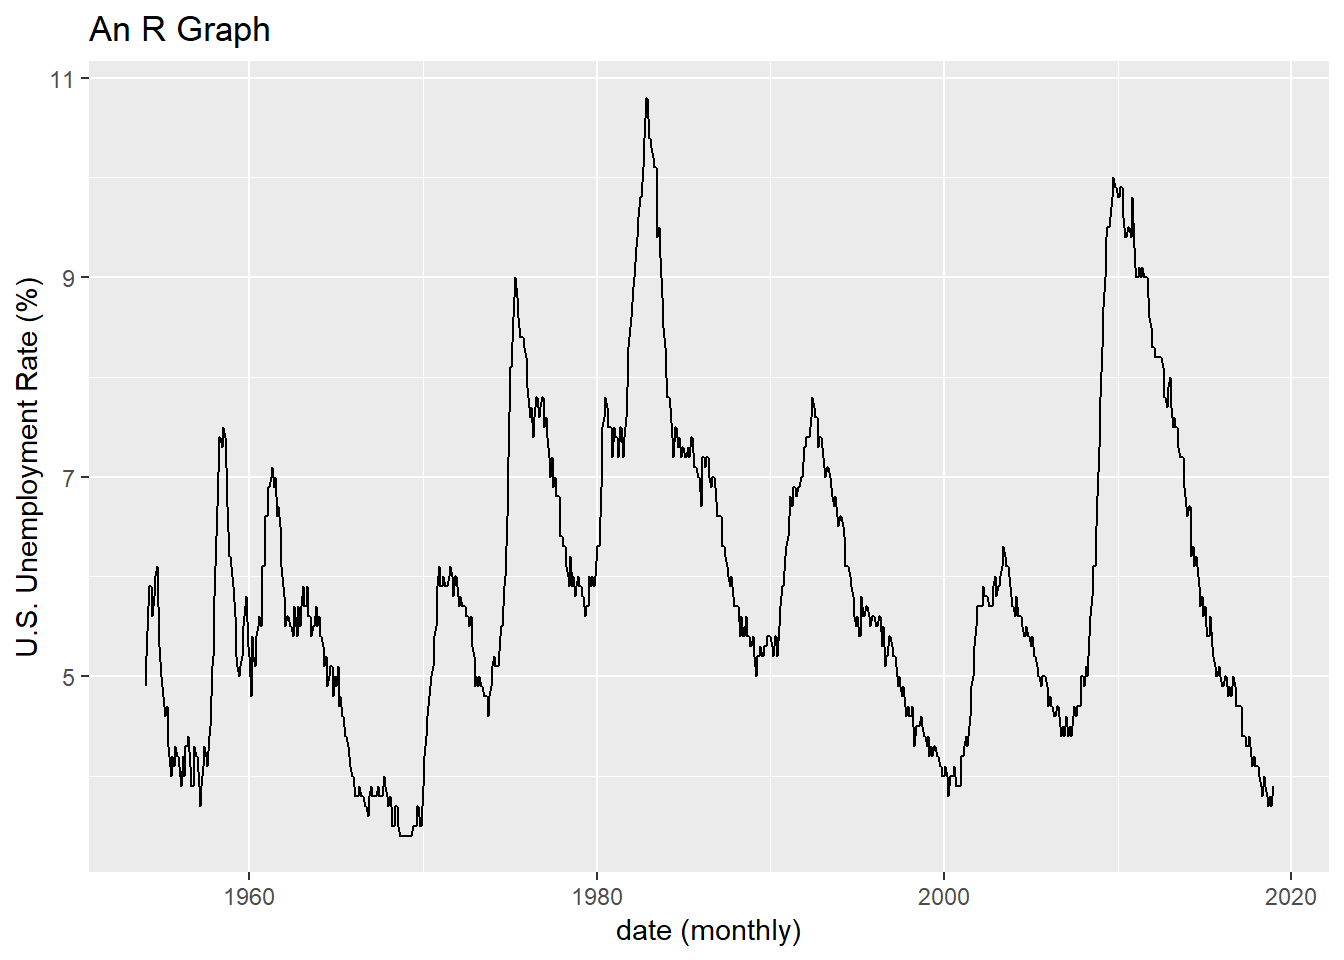 \label{fig:figs}Made with R ggplot2. Data Source: U.S. Bureau of Labor Statistics, Civilian Unemployment Rate [UNRATE], retrieved from FRED, Federal Reserve Bank of St. Louis; https://fred.stlouisfed.org/series/UNRATE, January 28, 2019.